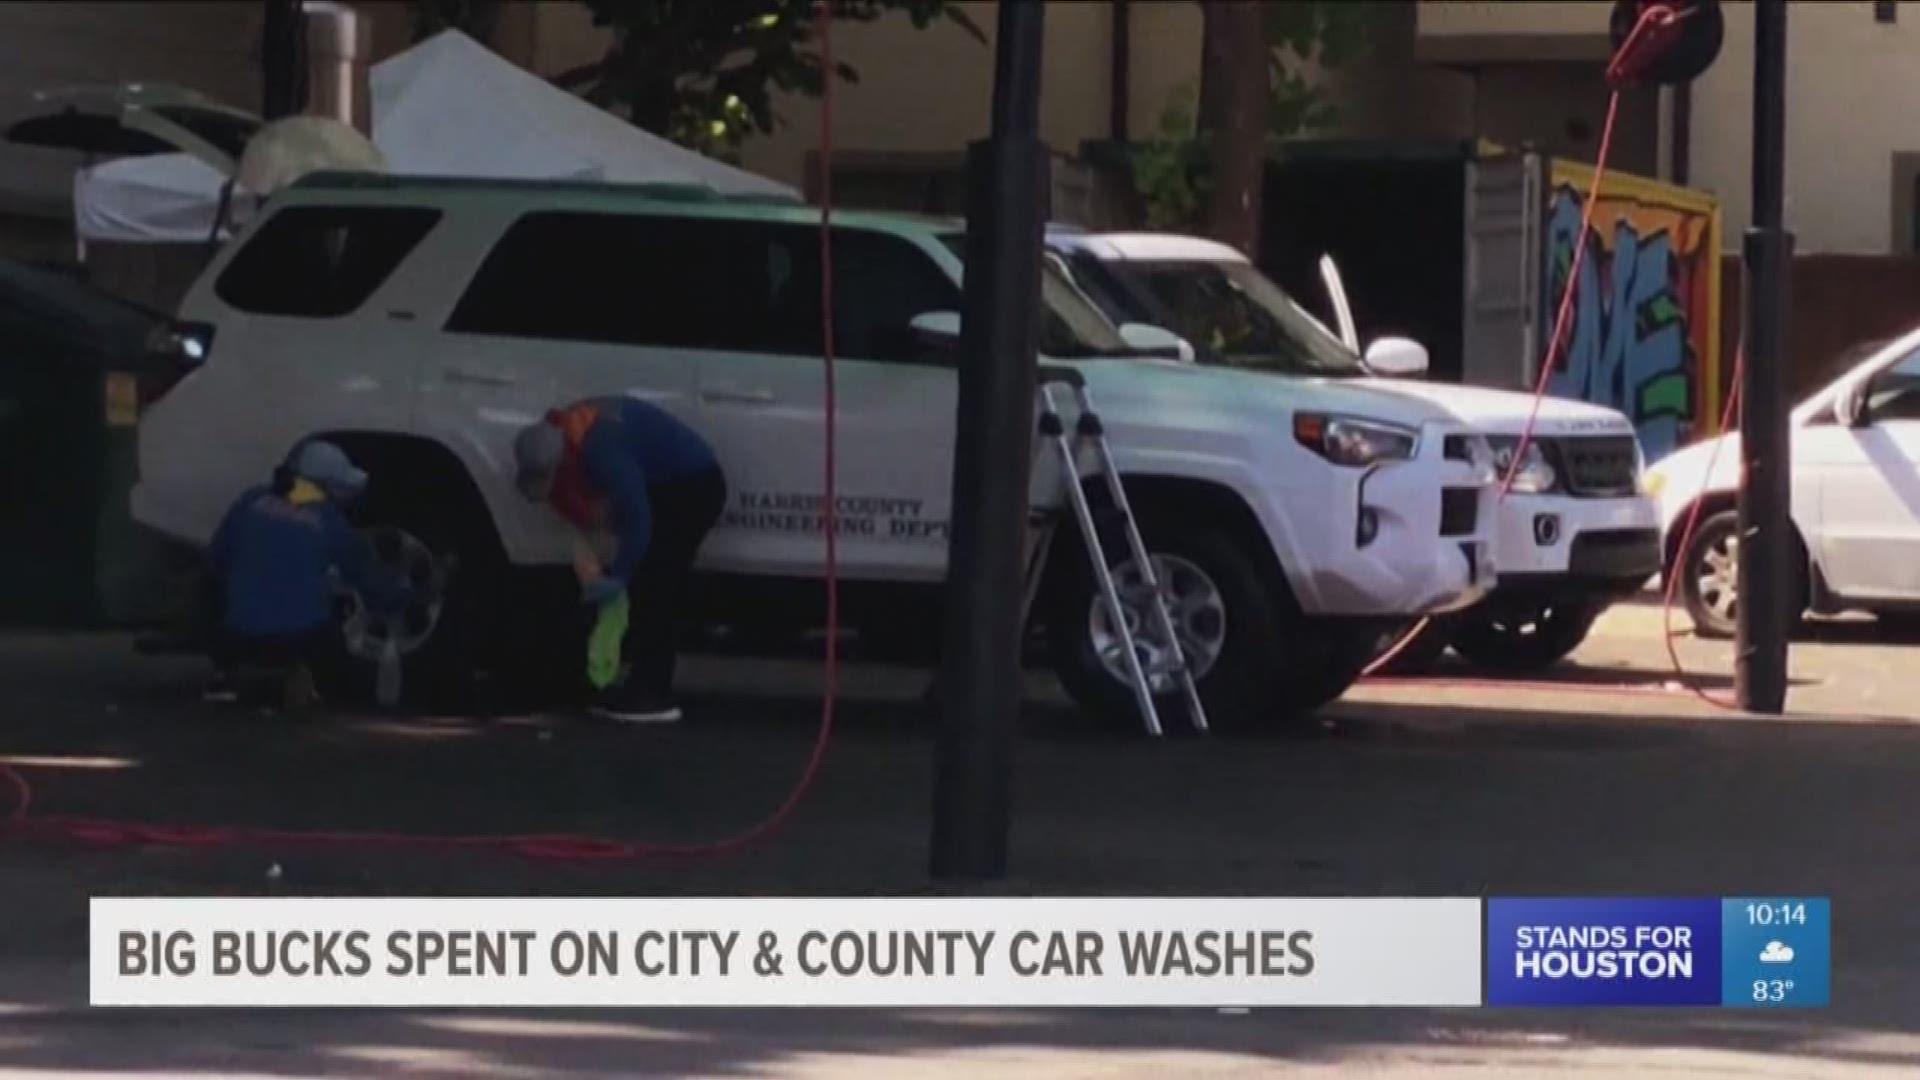 How much do you pay to get your car washed? You probably don't spend $100, $200 or more. But KHOU 11 Investigates discovered that's what it costs to keep some local government vehicles clean.